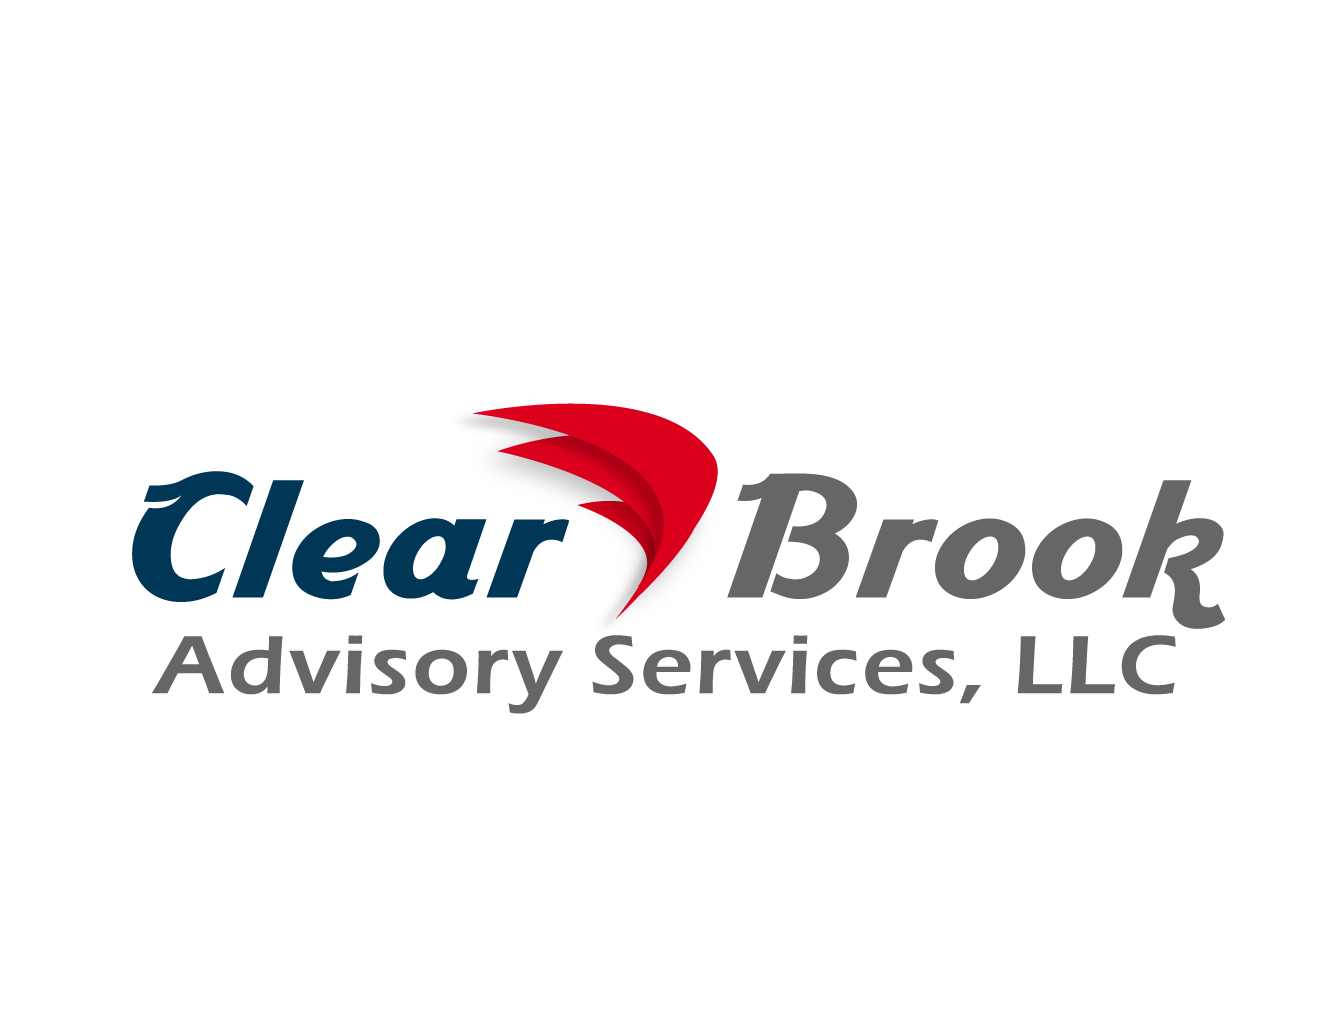 Clearbrook Logo - Logo Design for ClearBrook Advisory Services, LLC by freddy dirga ...